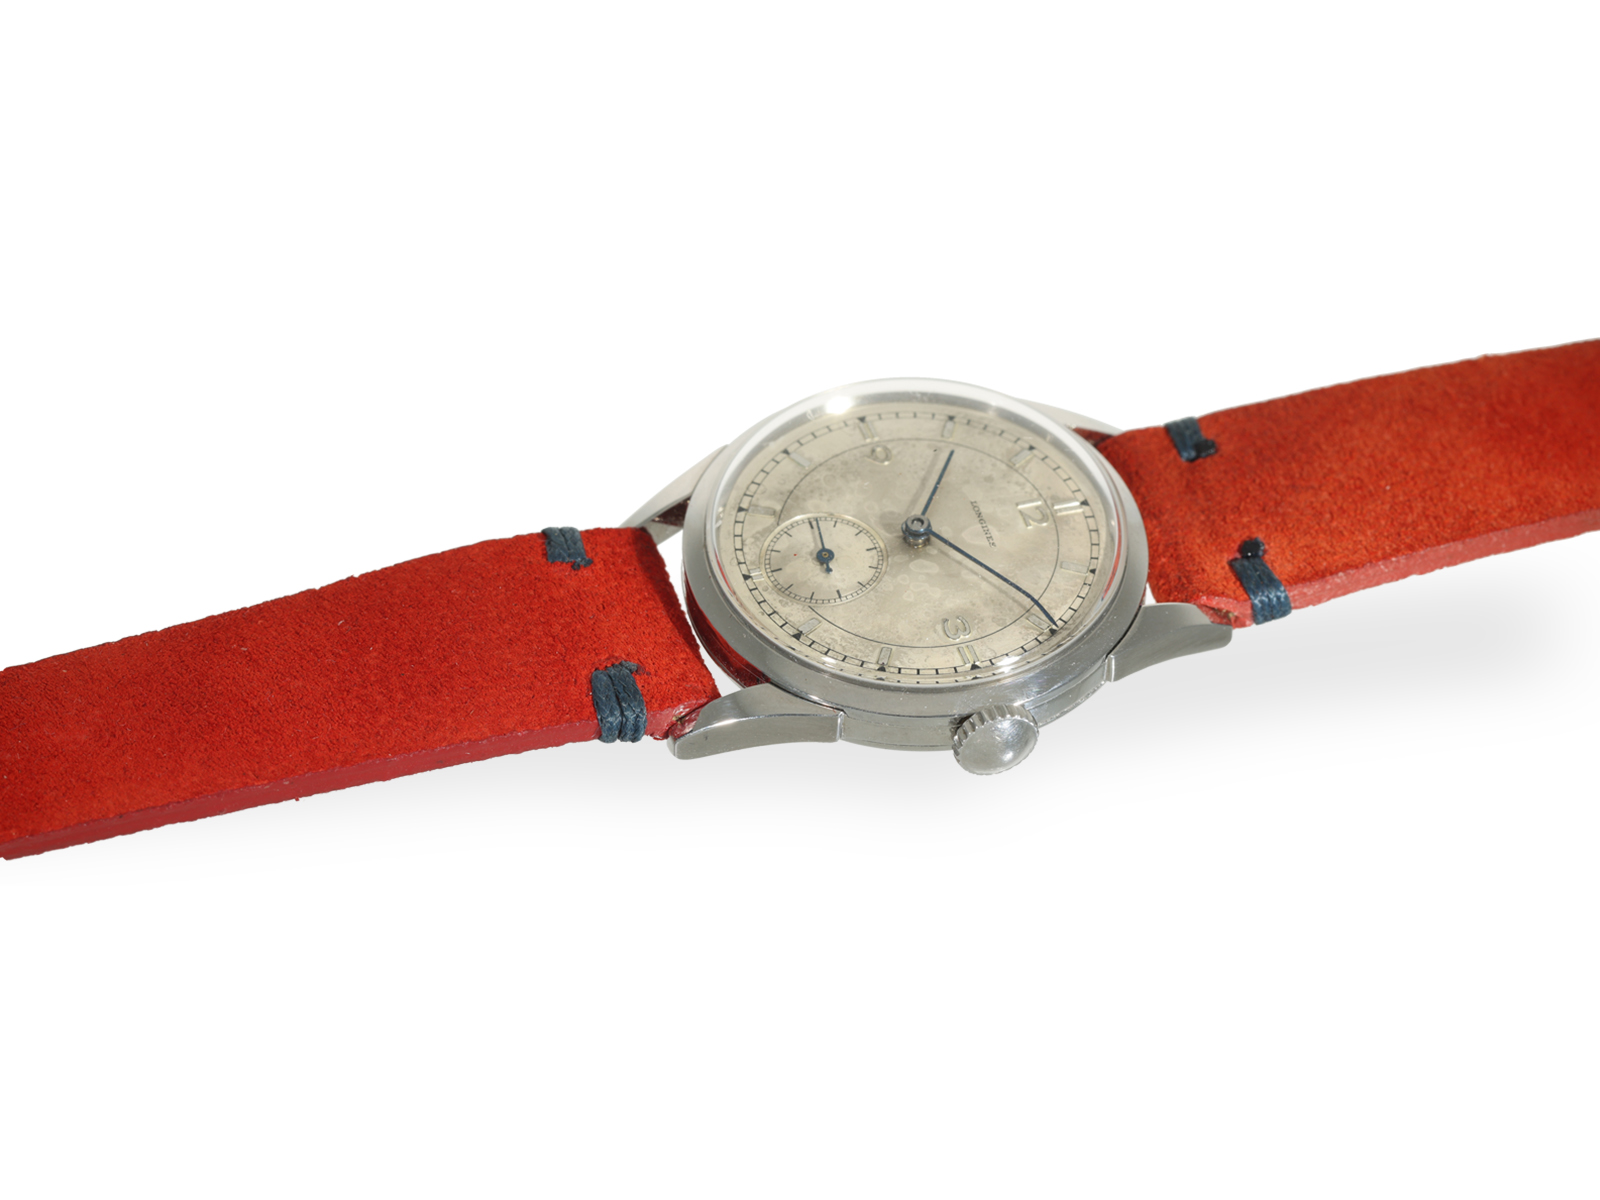 Wristwatch: Longines from 1956, rare reference 6666, with extract from the archives - Image 6 of 8